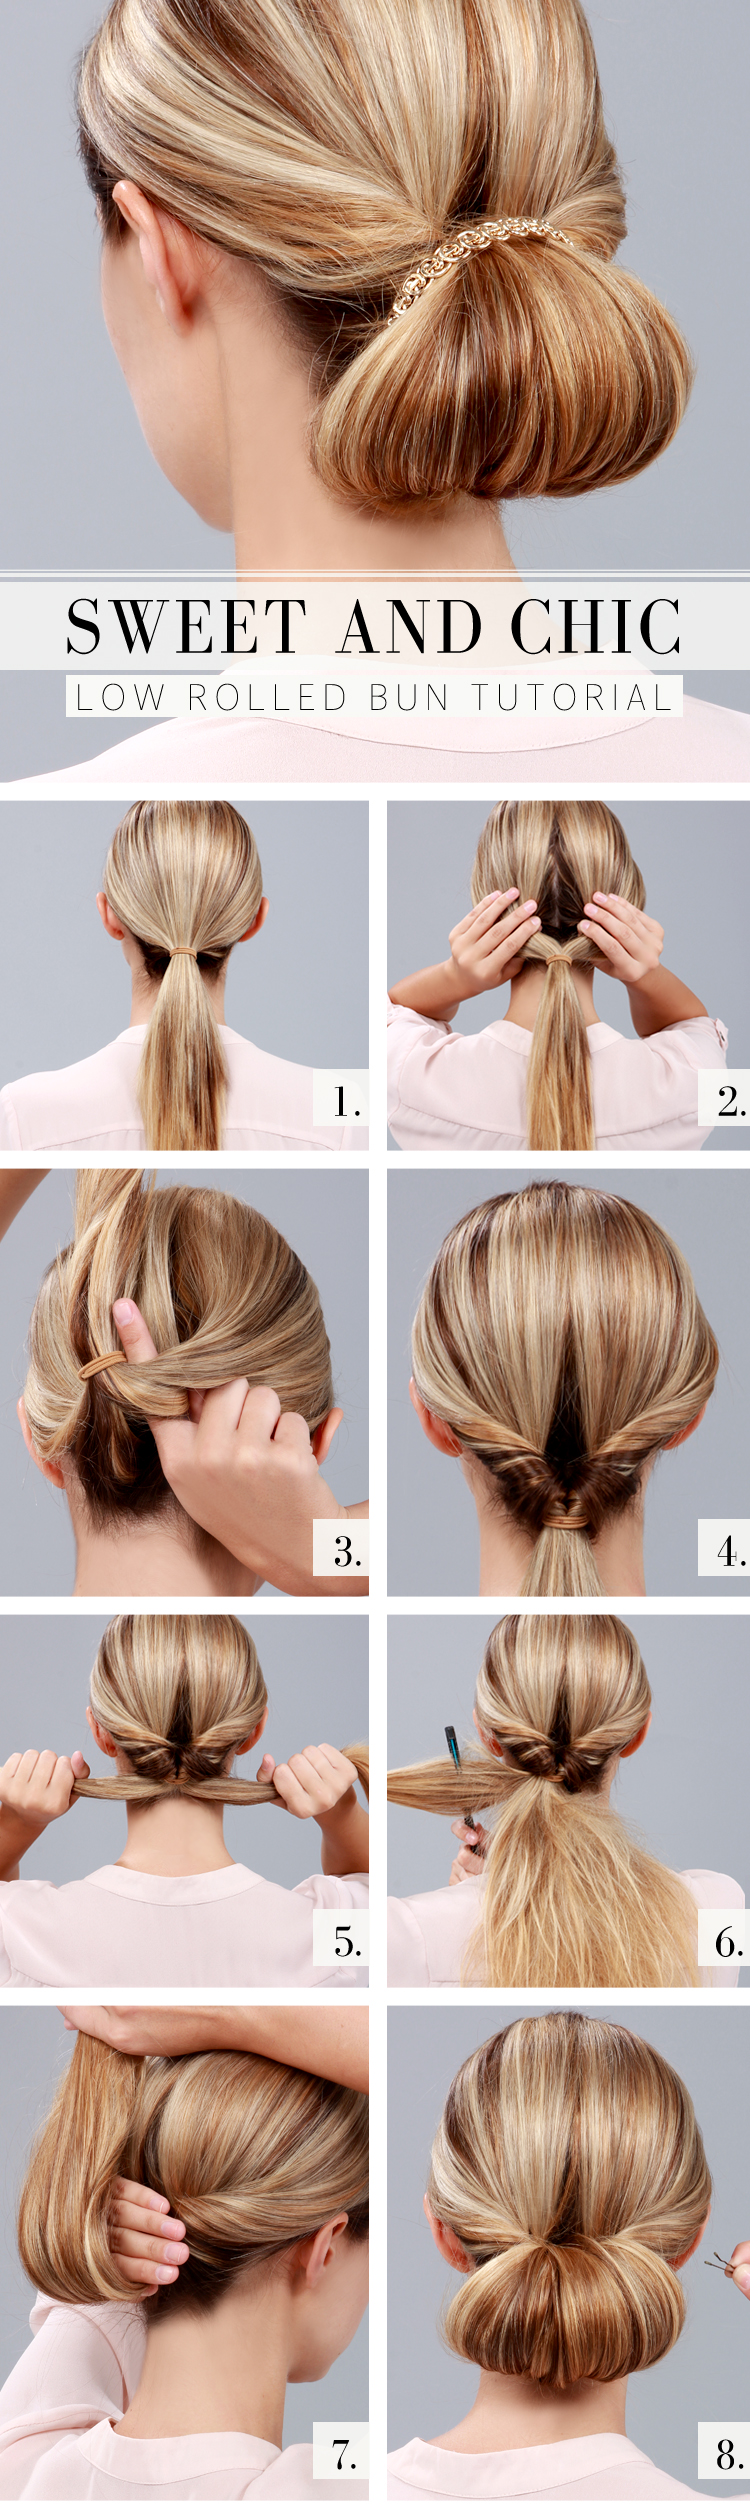 Top 10 Hairstyle  Tutorials for Summer Pretty Designs